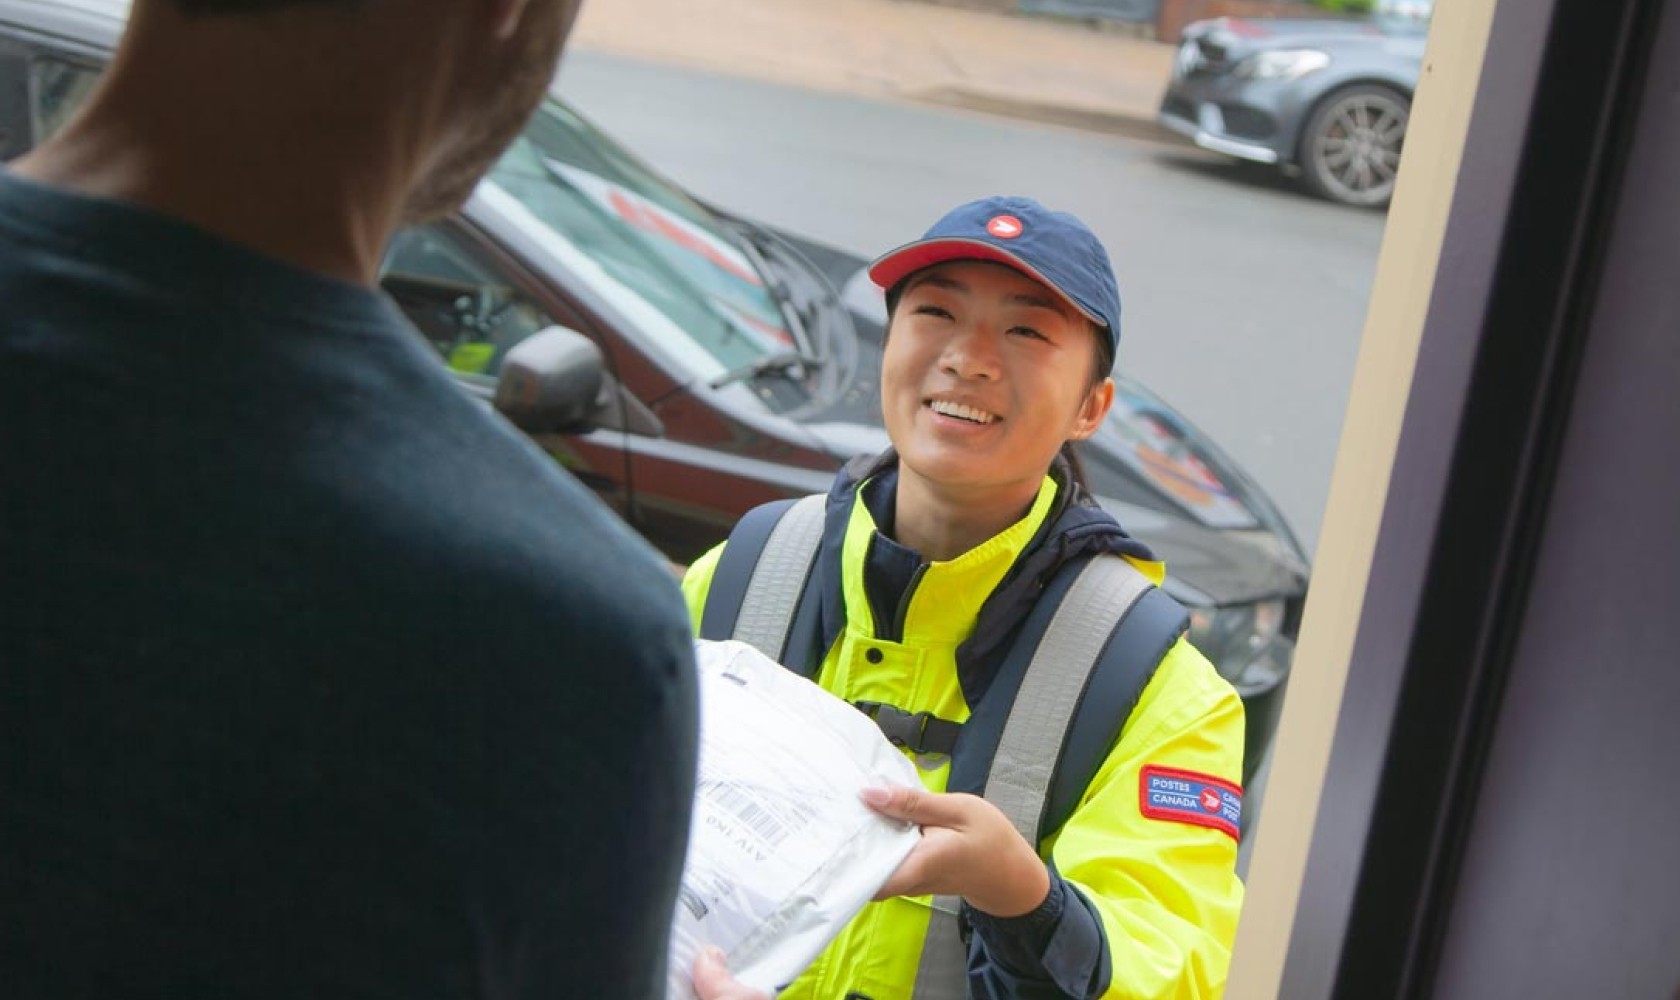 A Canada Post employee wearing a bright yellow jacket delivers a package to a man standing in his doorway. 